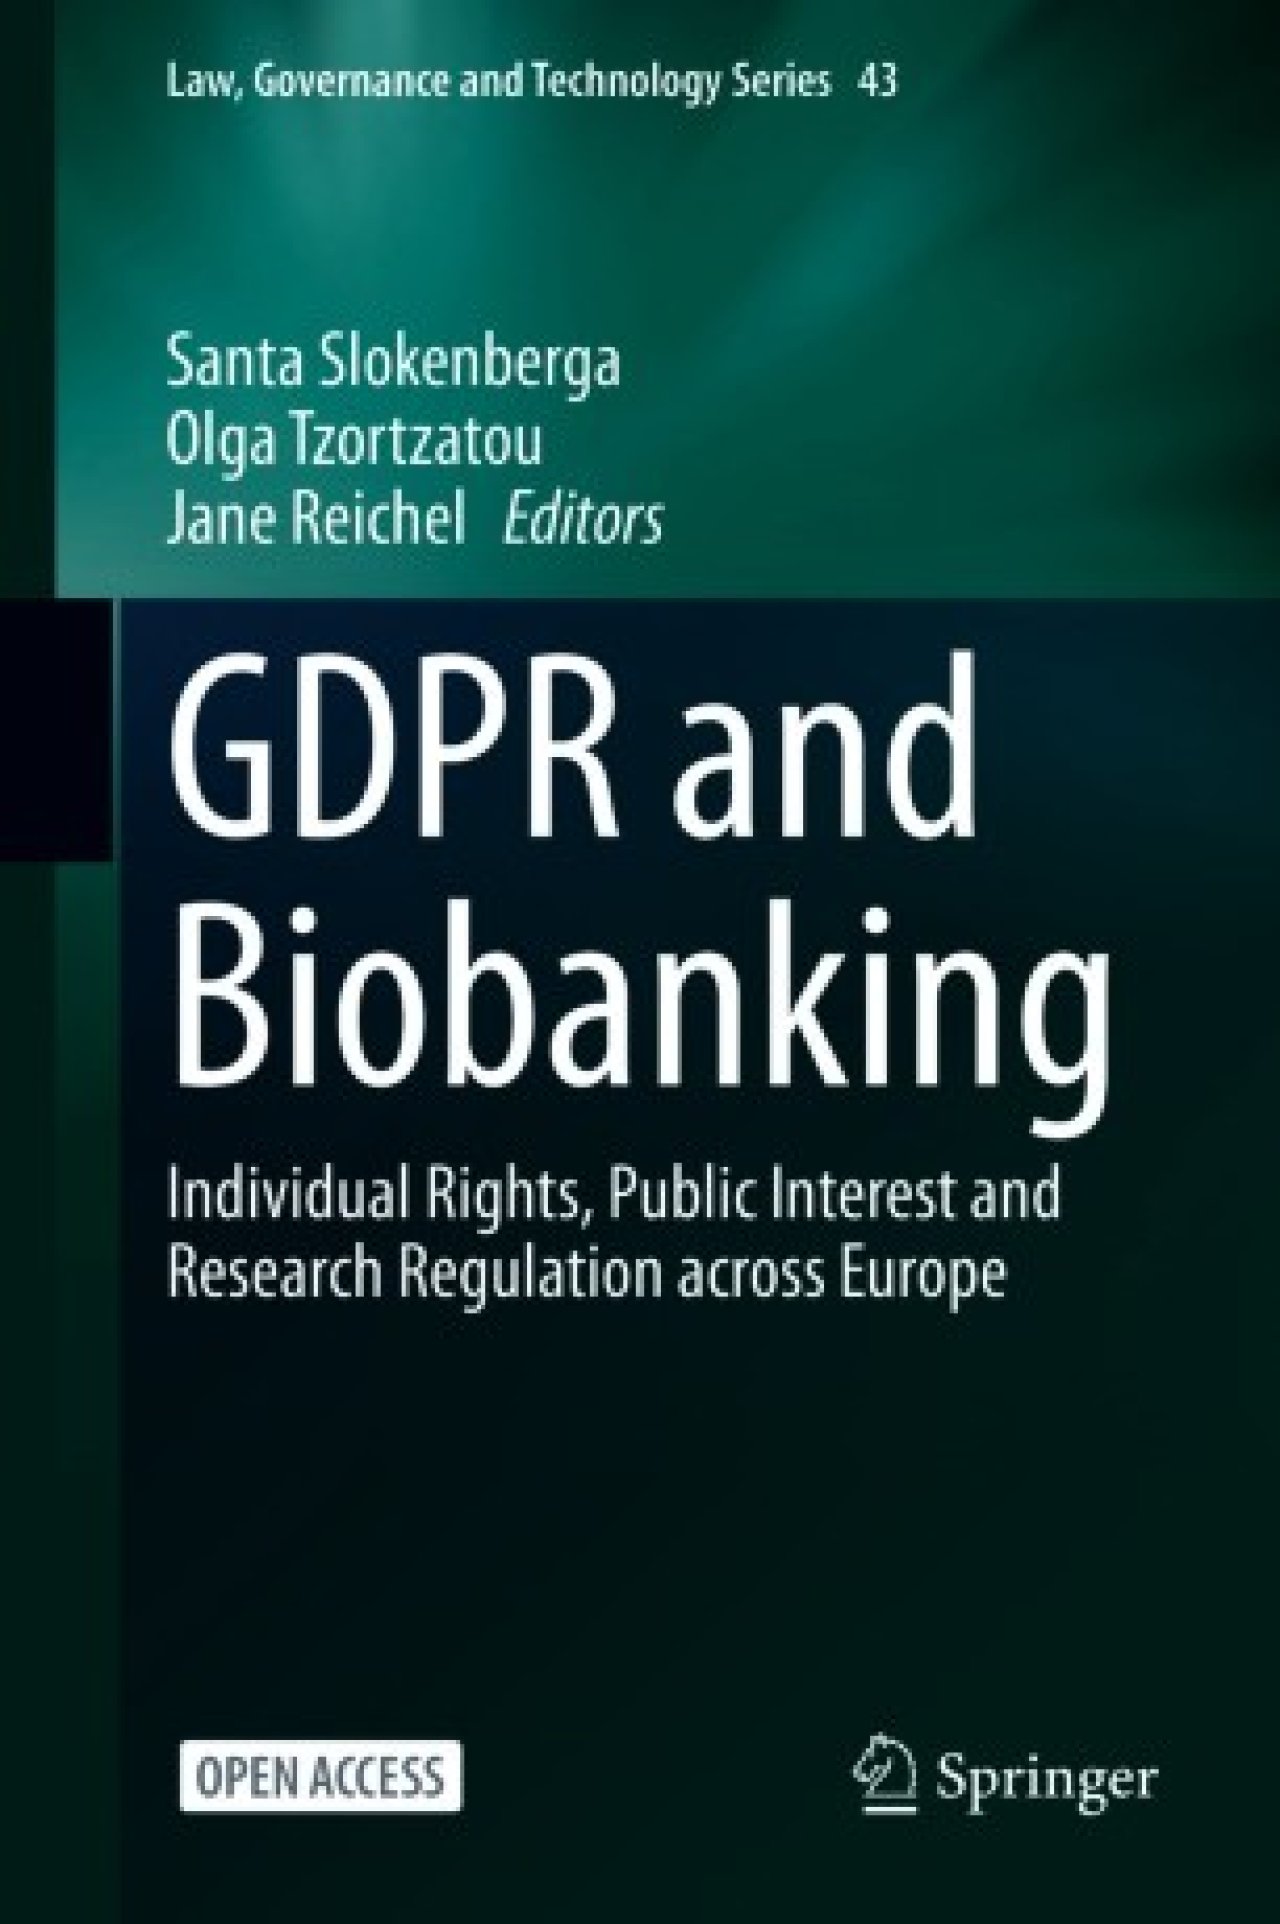 Cover - GDPR and Biobanking.